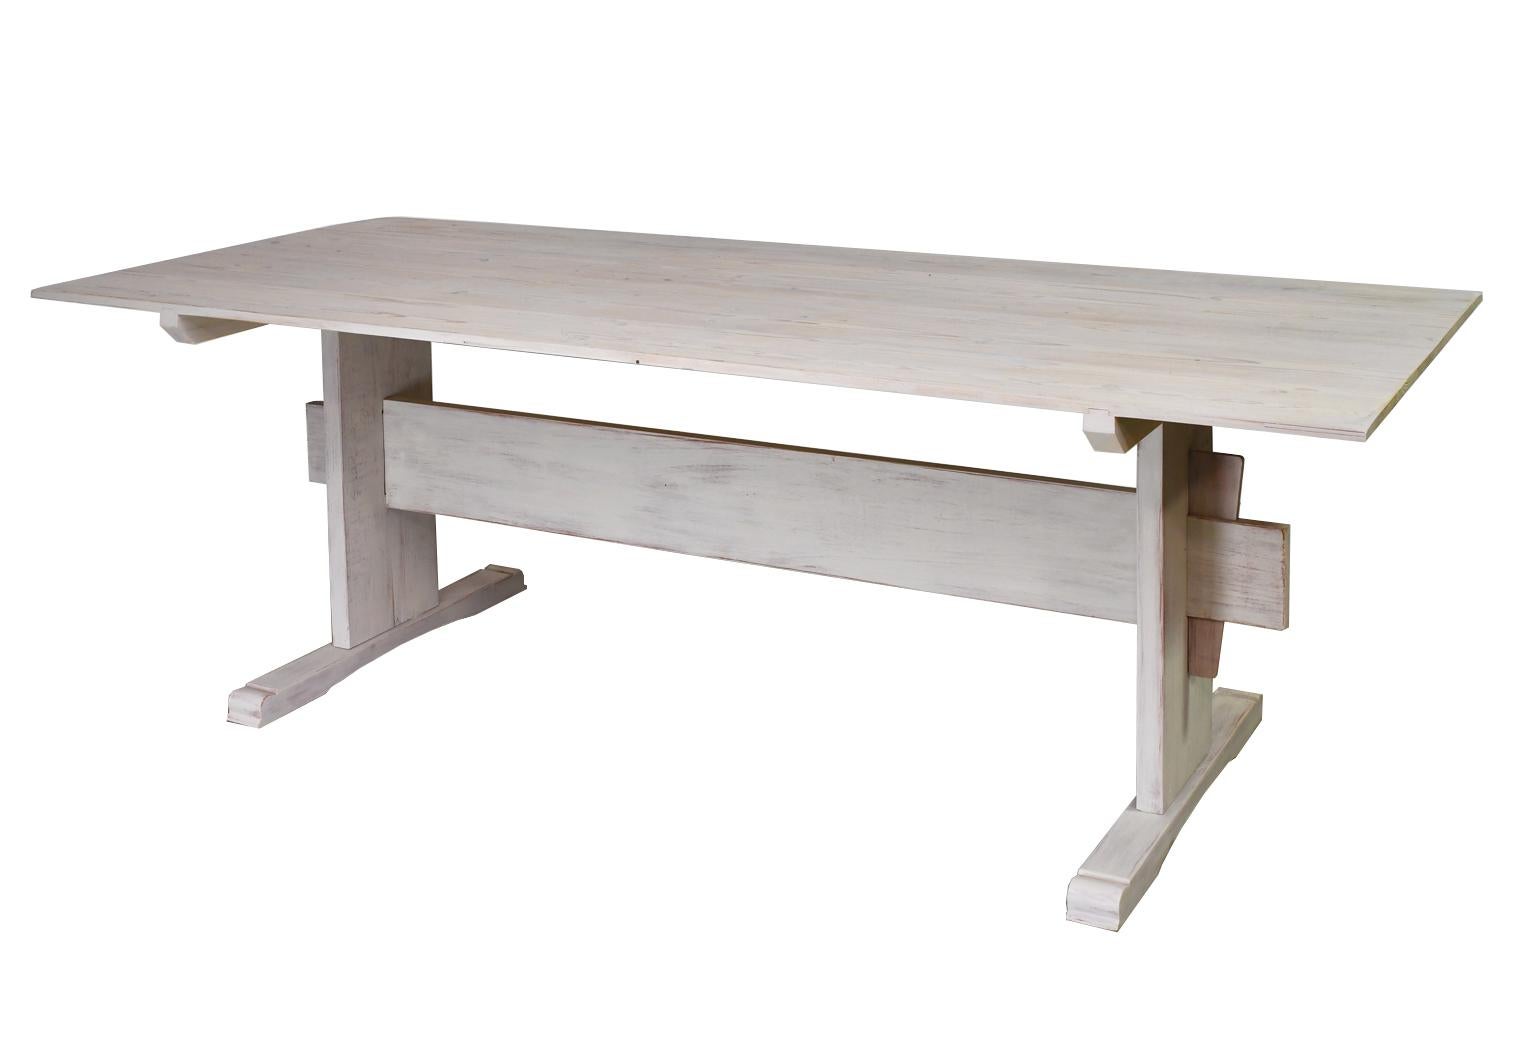 Contemporary Bonnin Ashley Custom Bench-Made Scandinavian-Inspired Trestle Dining Table For Sale